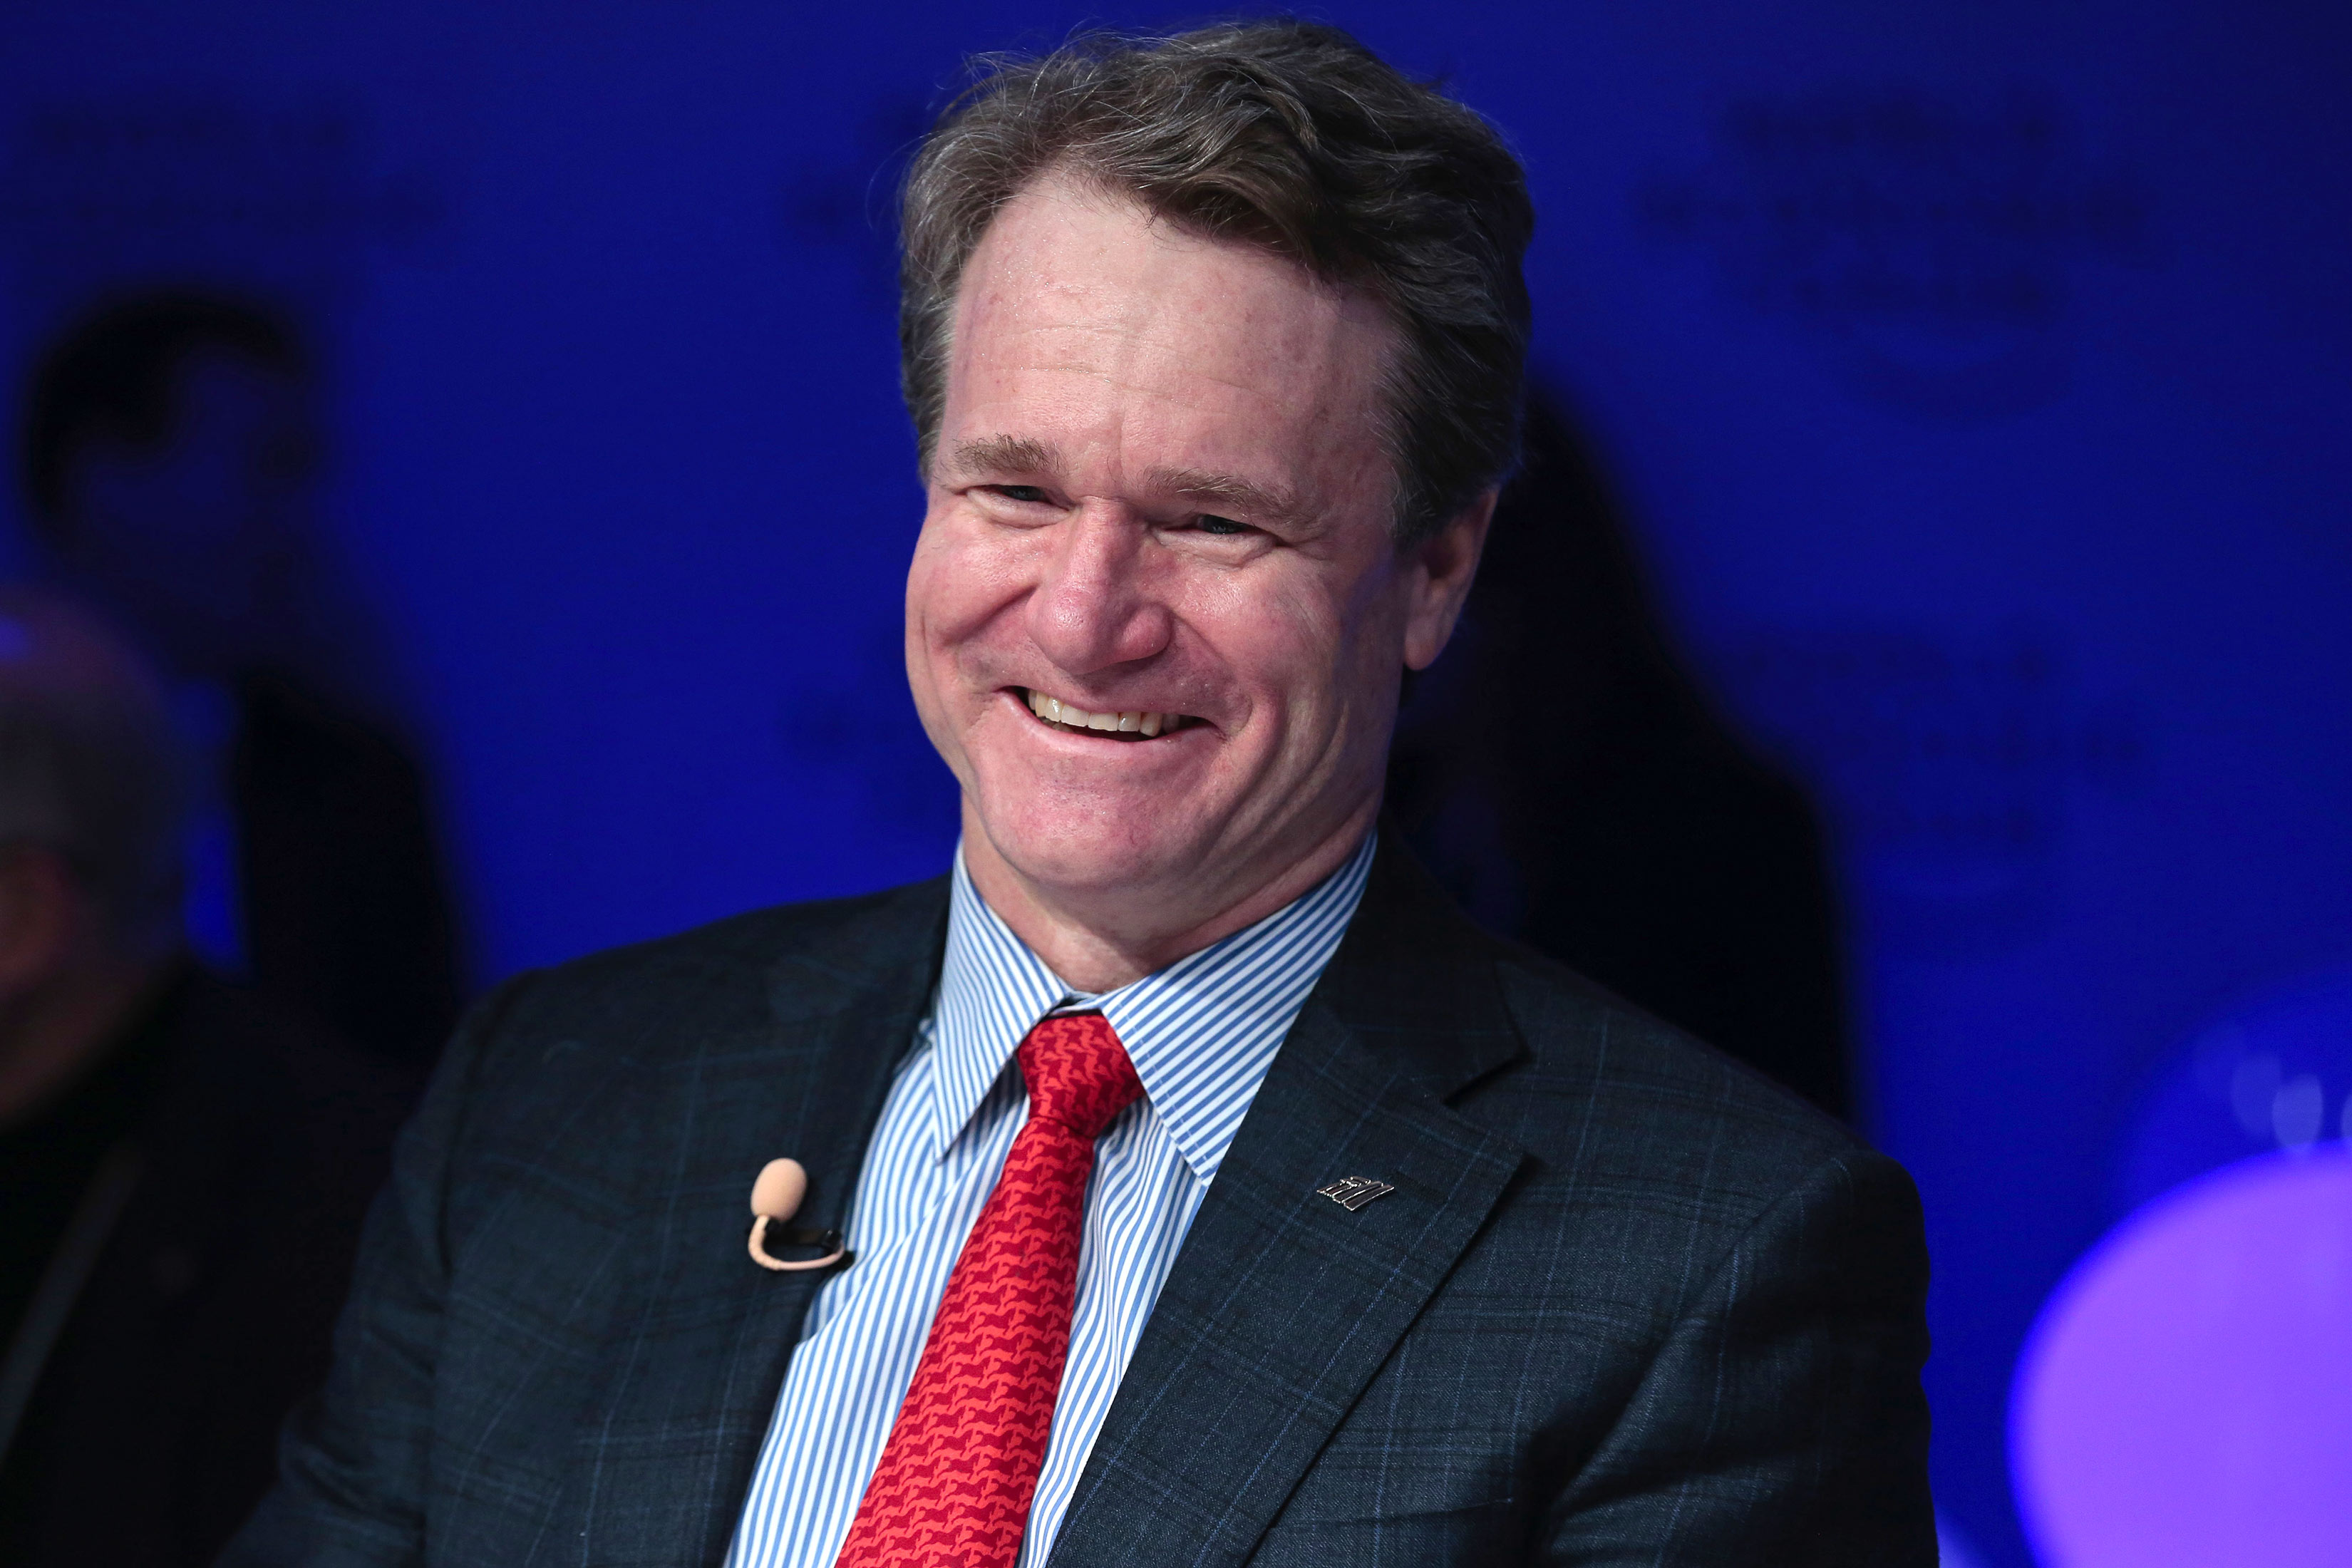 Bank of America Increases CEO Moynihan's Pay 23 to 16 Million Bloomberg